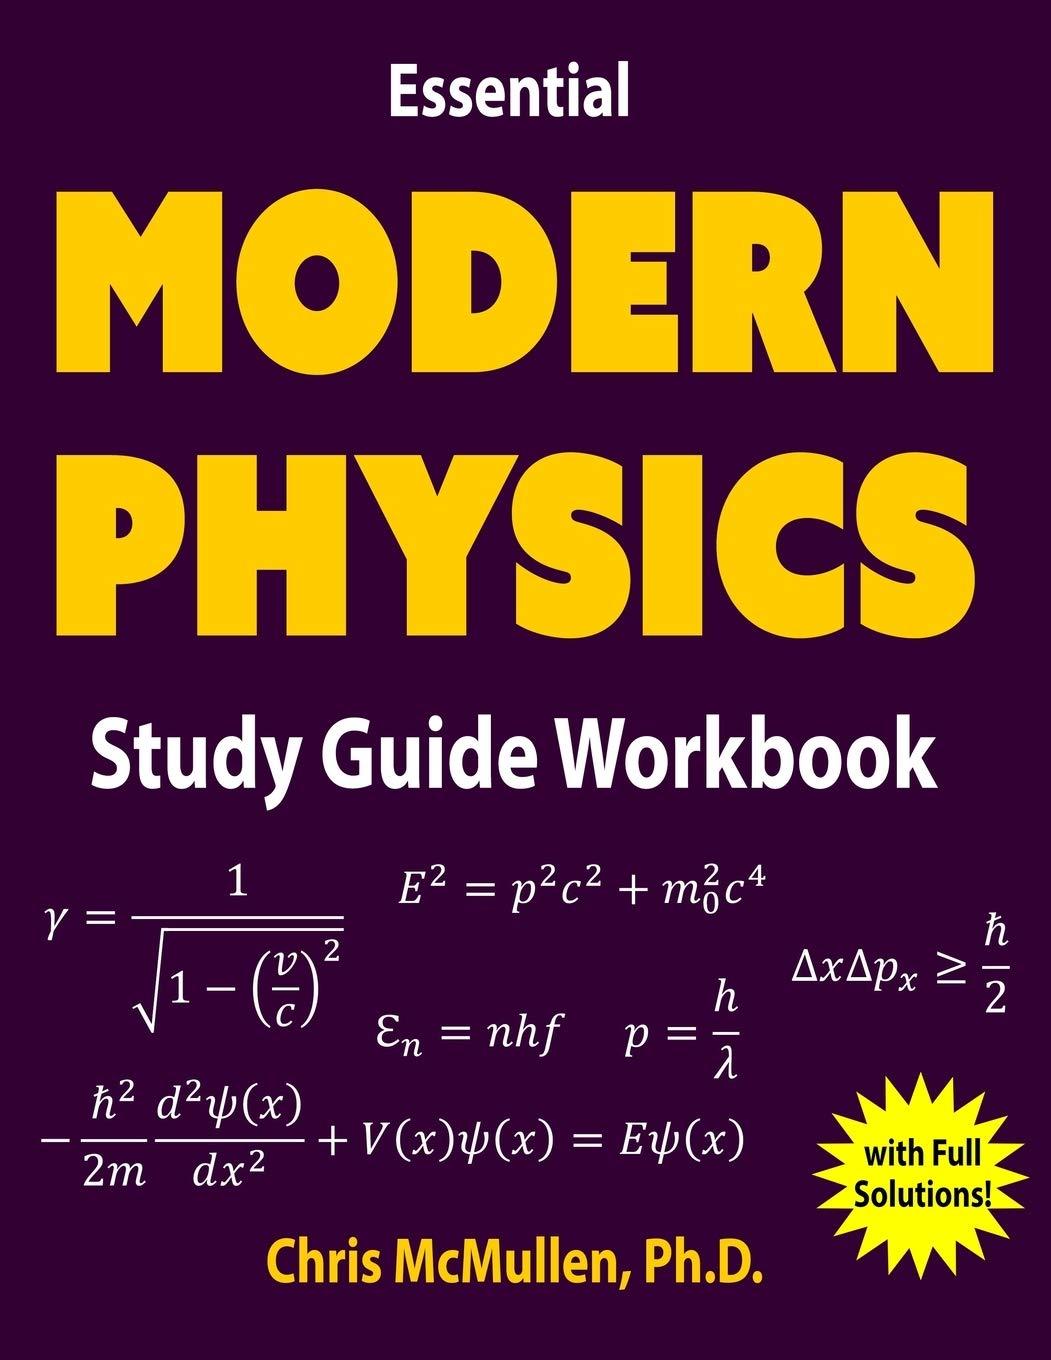 essential modern physics study guide workbook 1st edition chris mcmullen 1941691285, 978-1941691281